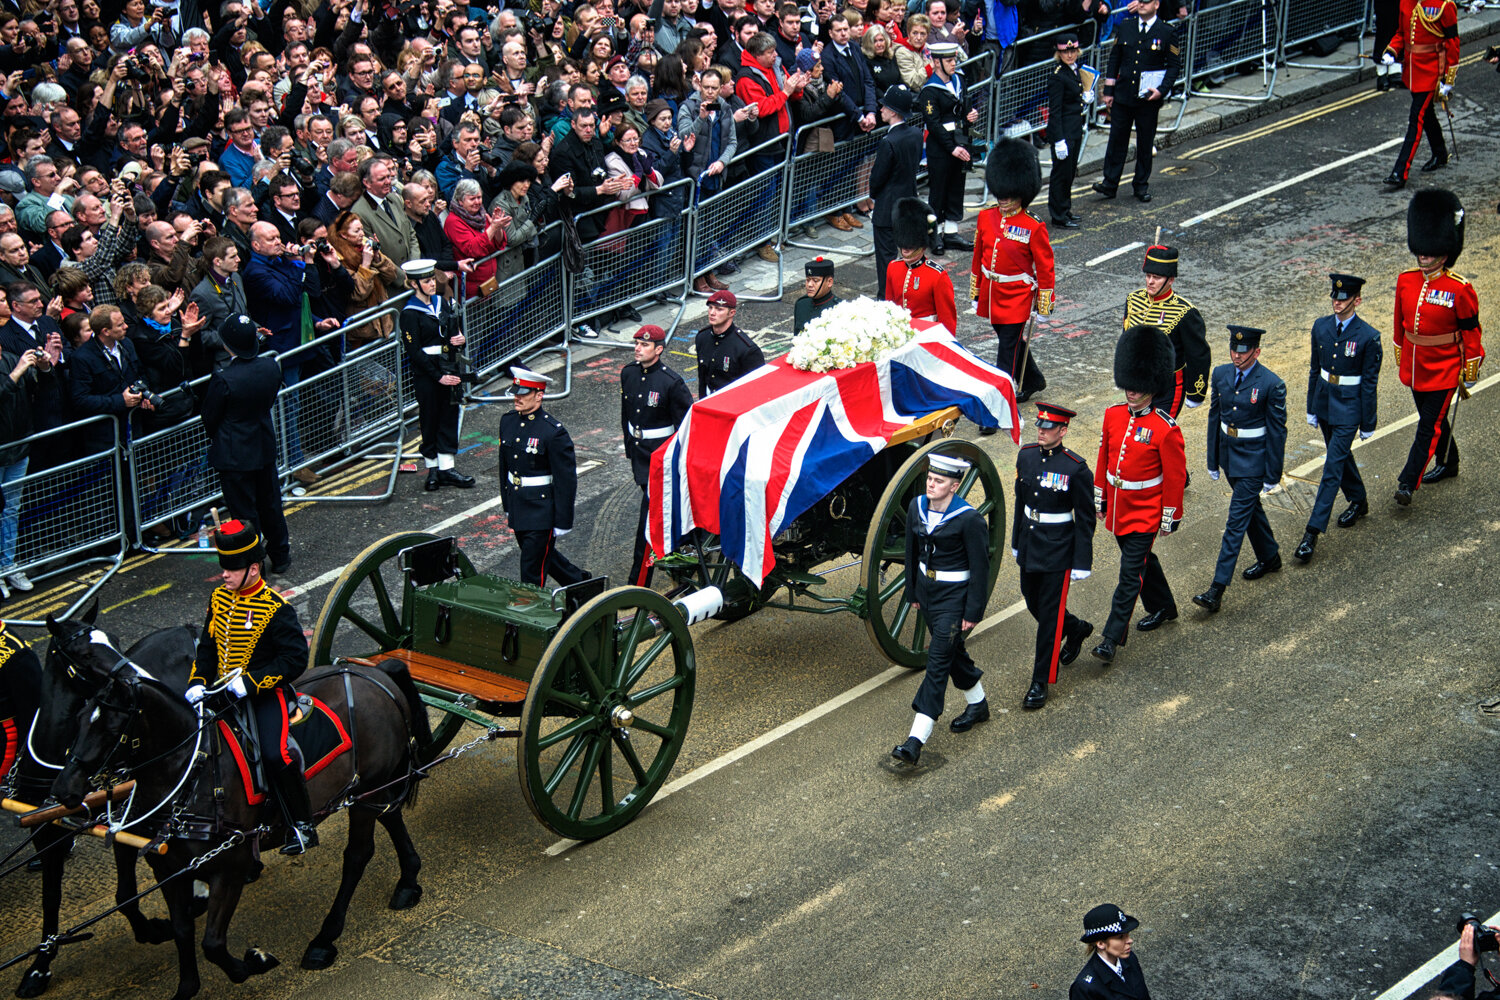  Prime Minister Margaret Thatcher’s casket arriving at St. Paul’s Cathedral for the memorial service 